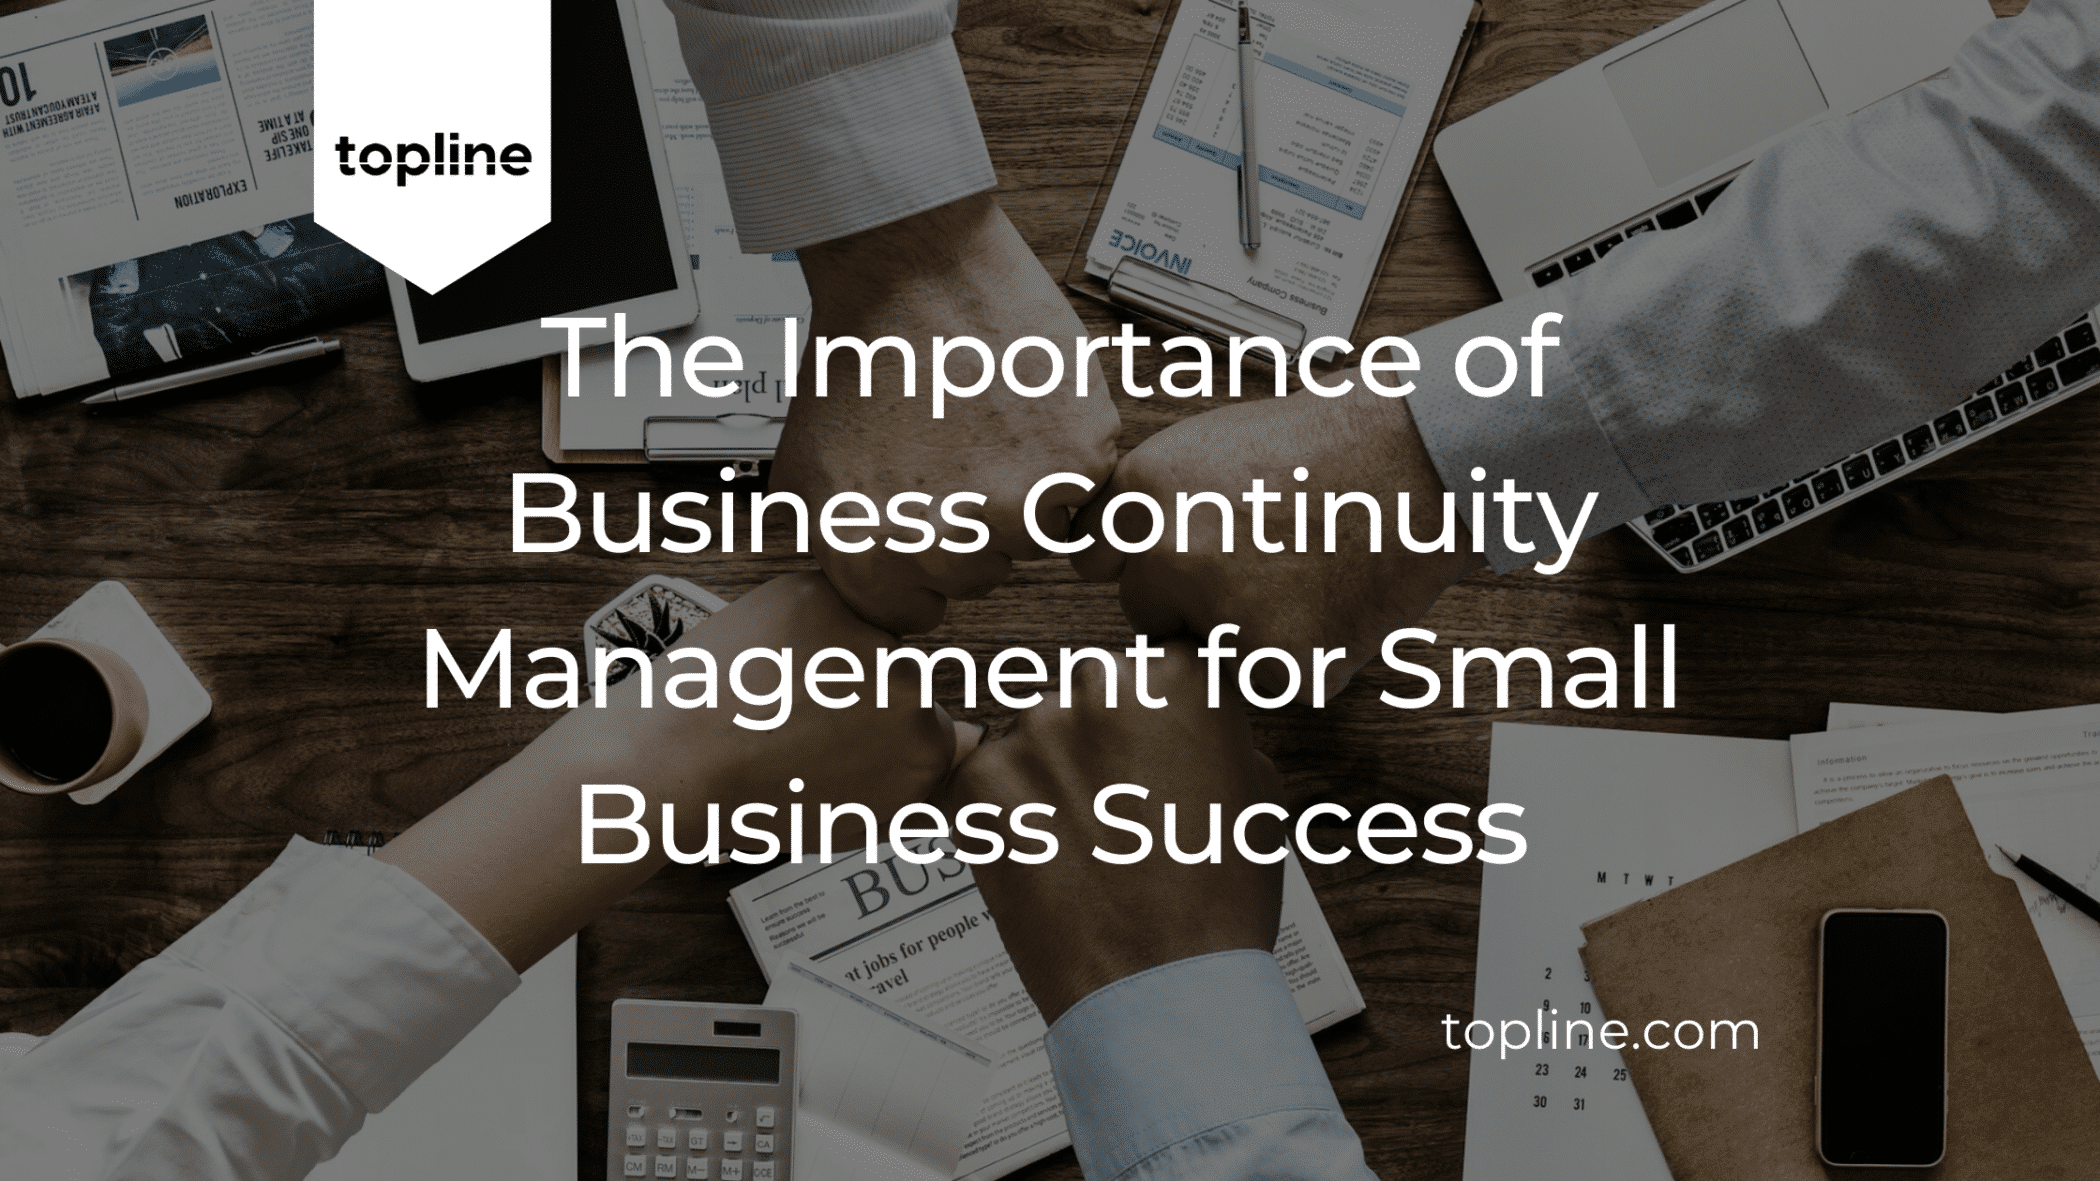 The Importance of Business Continuity Management for Small Business Success